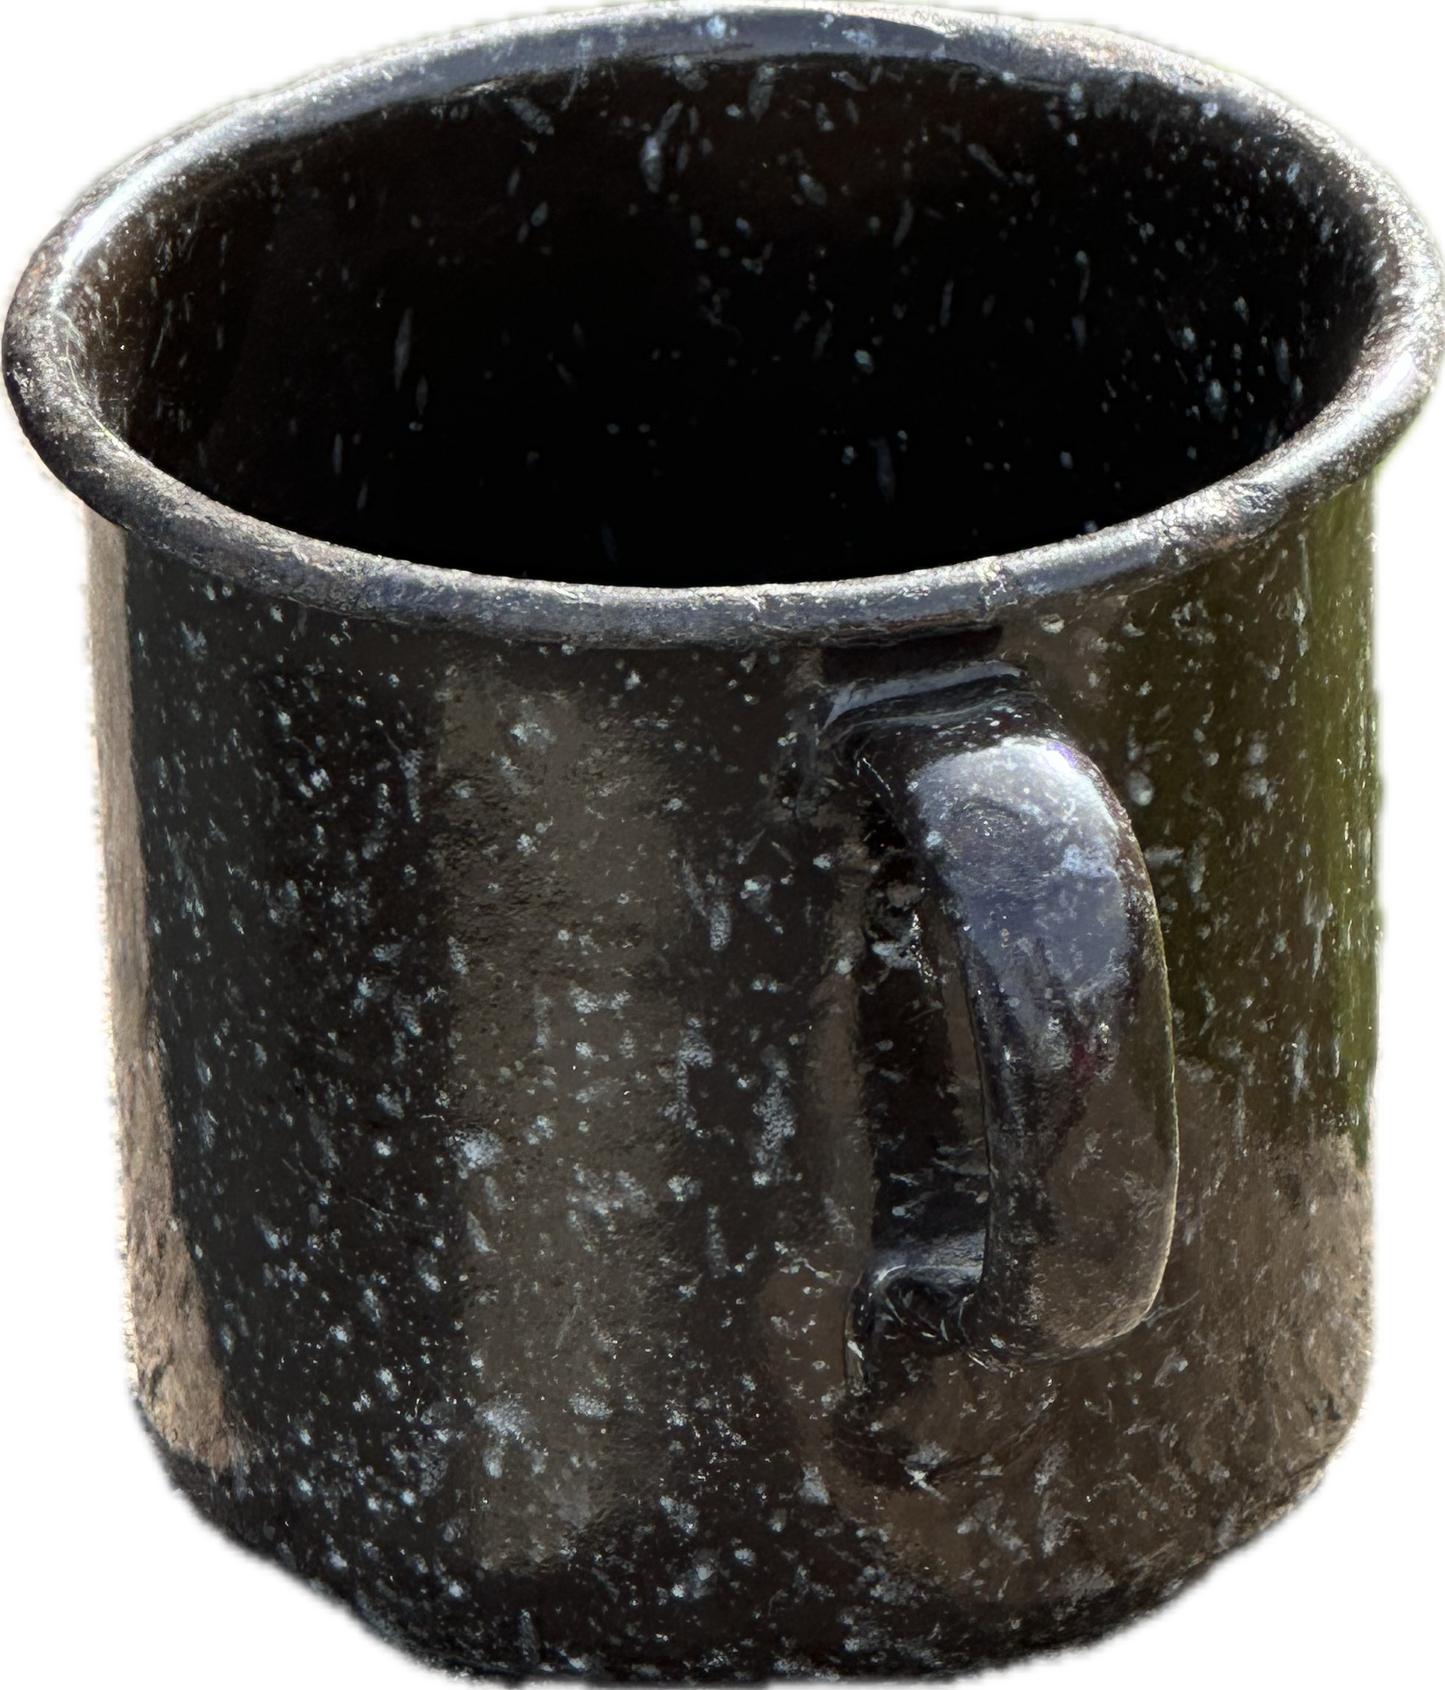 MONUMENTS MEN: Granger HERO Brown Speckled Metal Cup from Apartment in Sc. 174